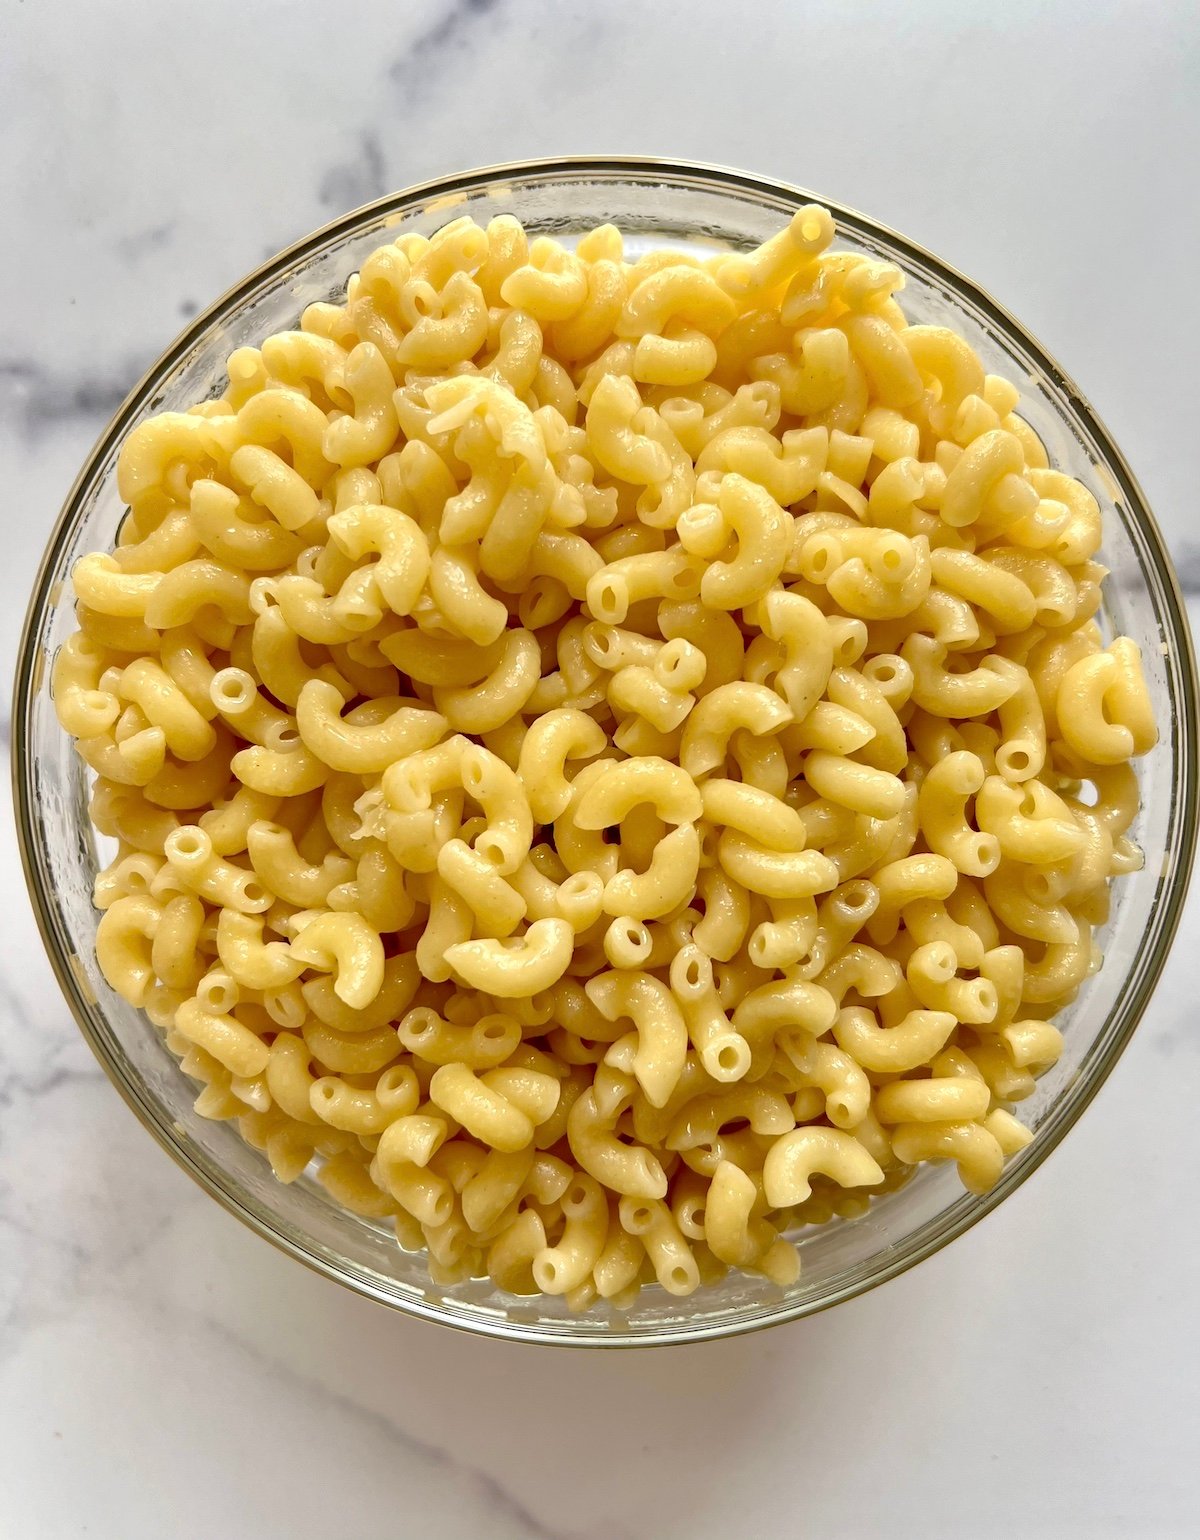 Boiled macaroni noodles in bowl.